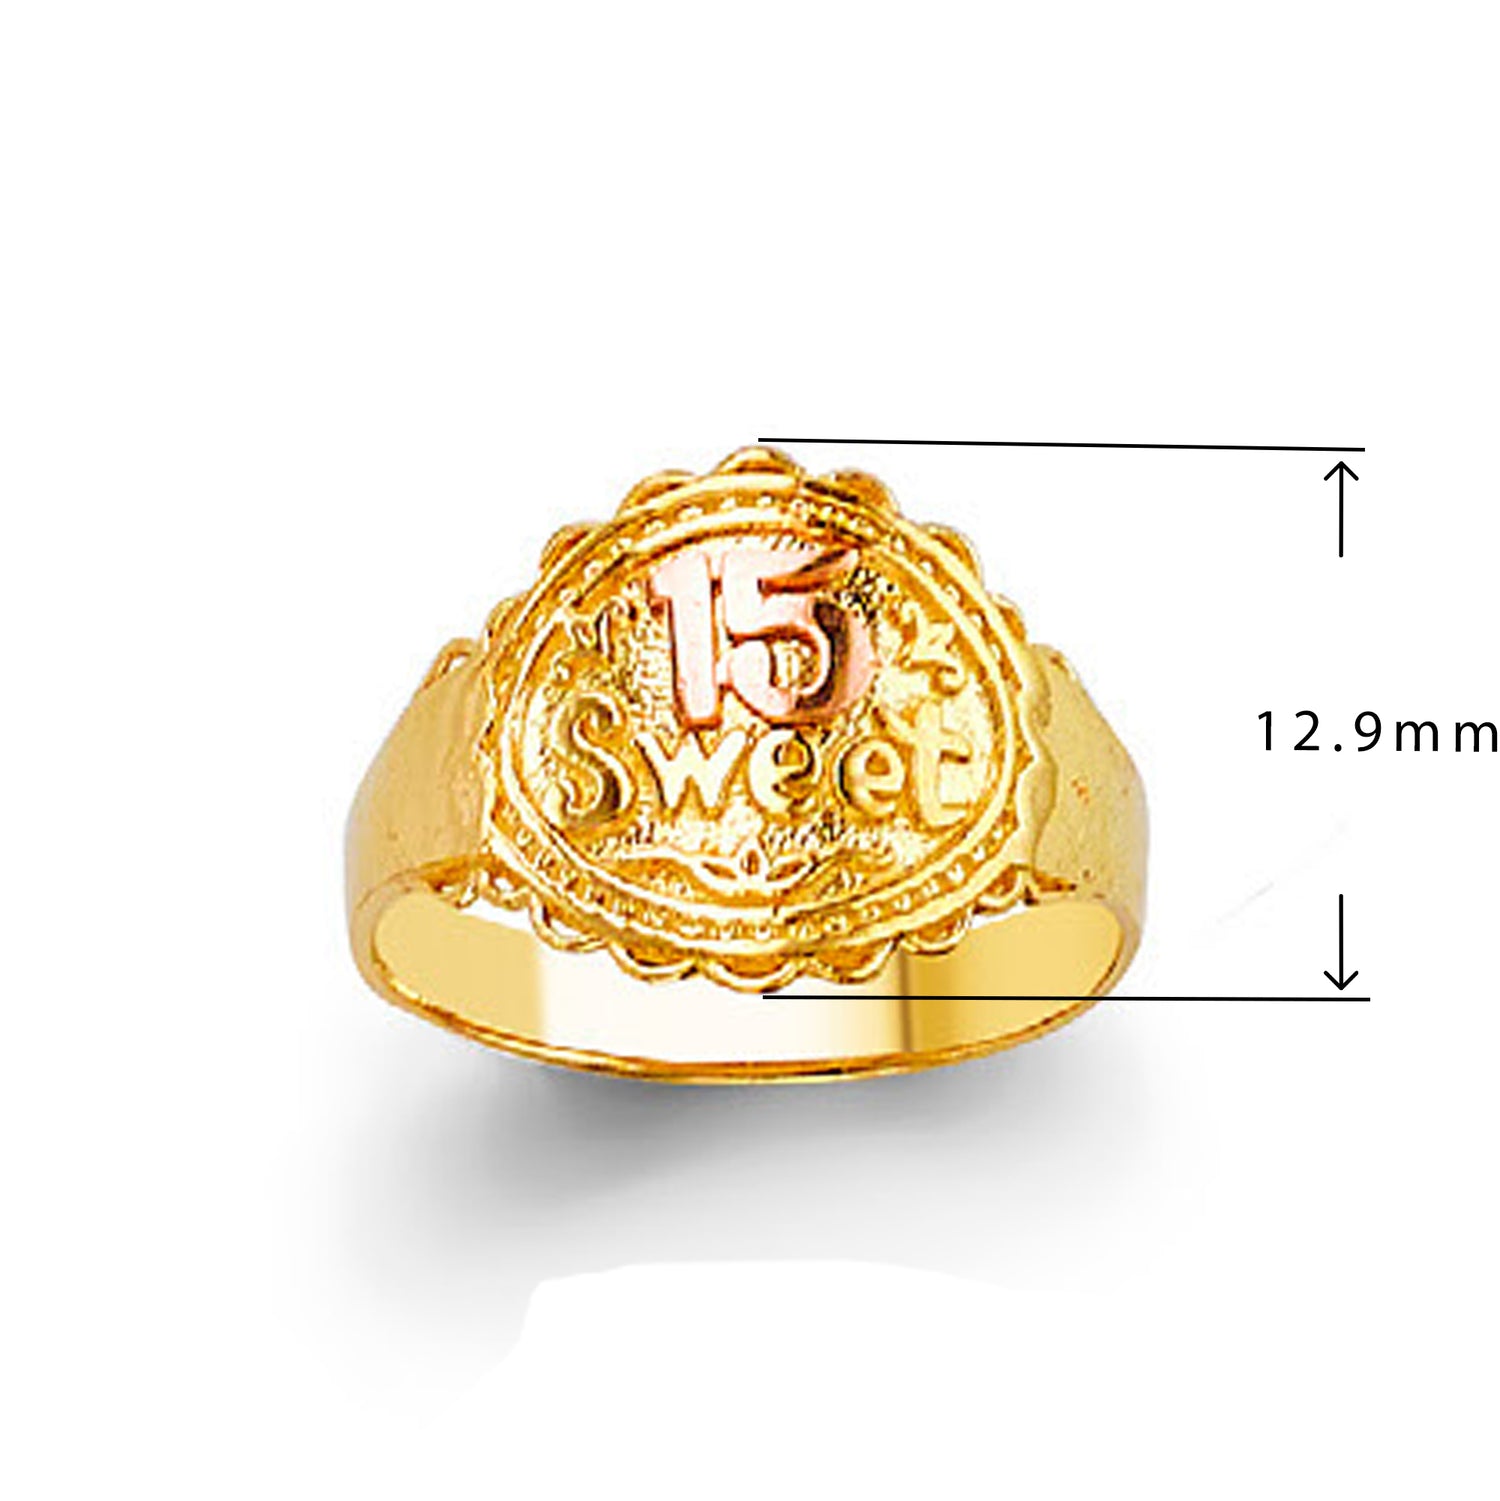 Personalized Numeric Casting Ring in Solid Gold with Measurement